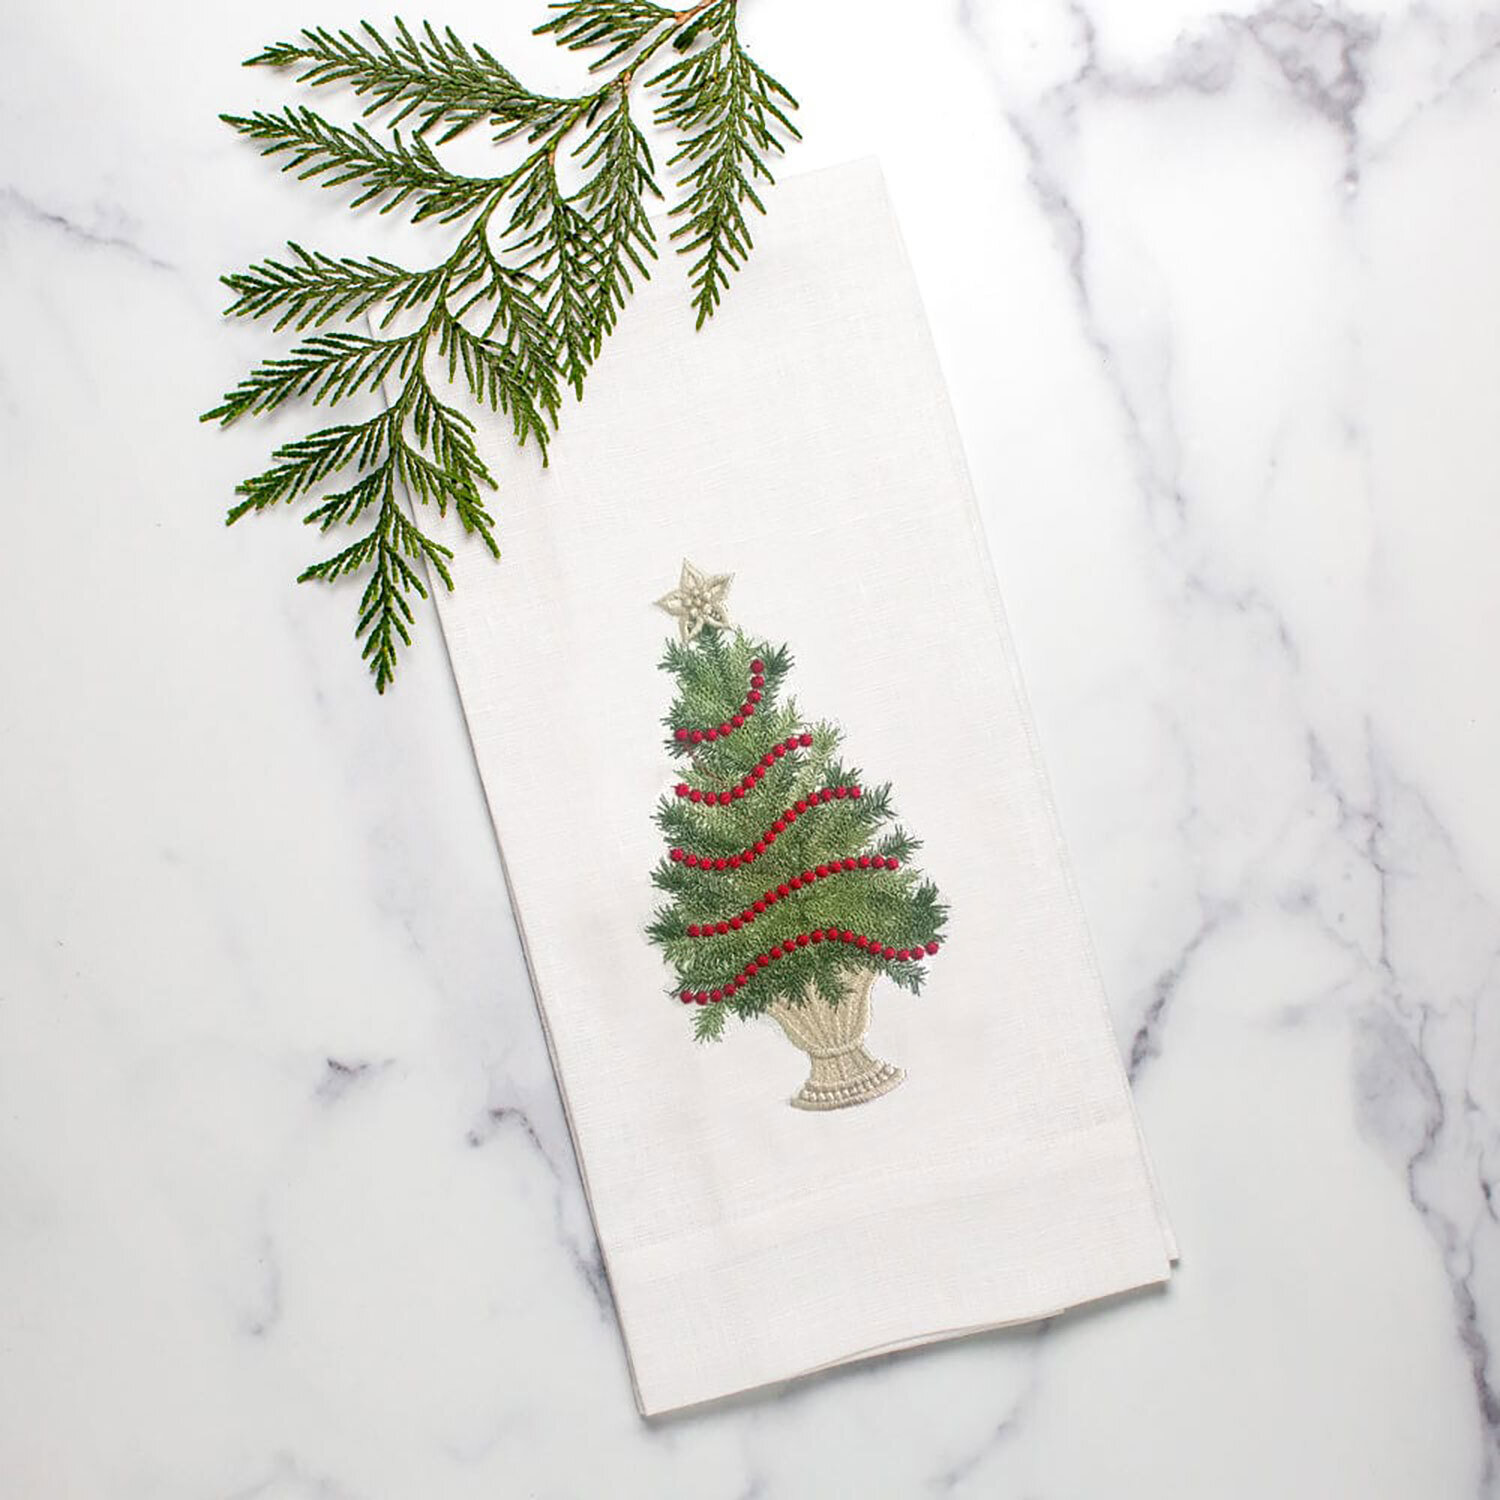 Crown Christmas Tree with Trim Linen Towel White Set of 4 T1062